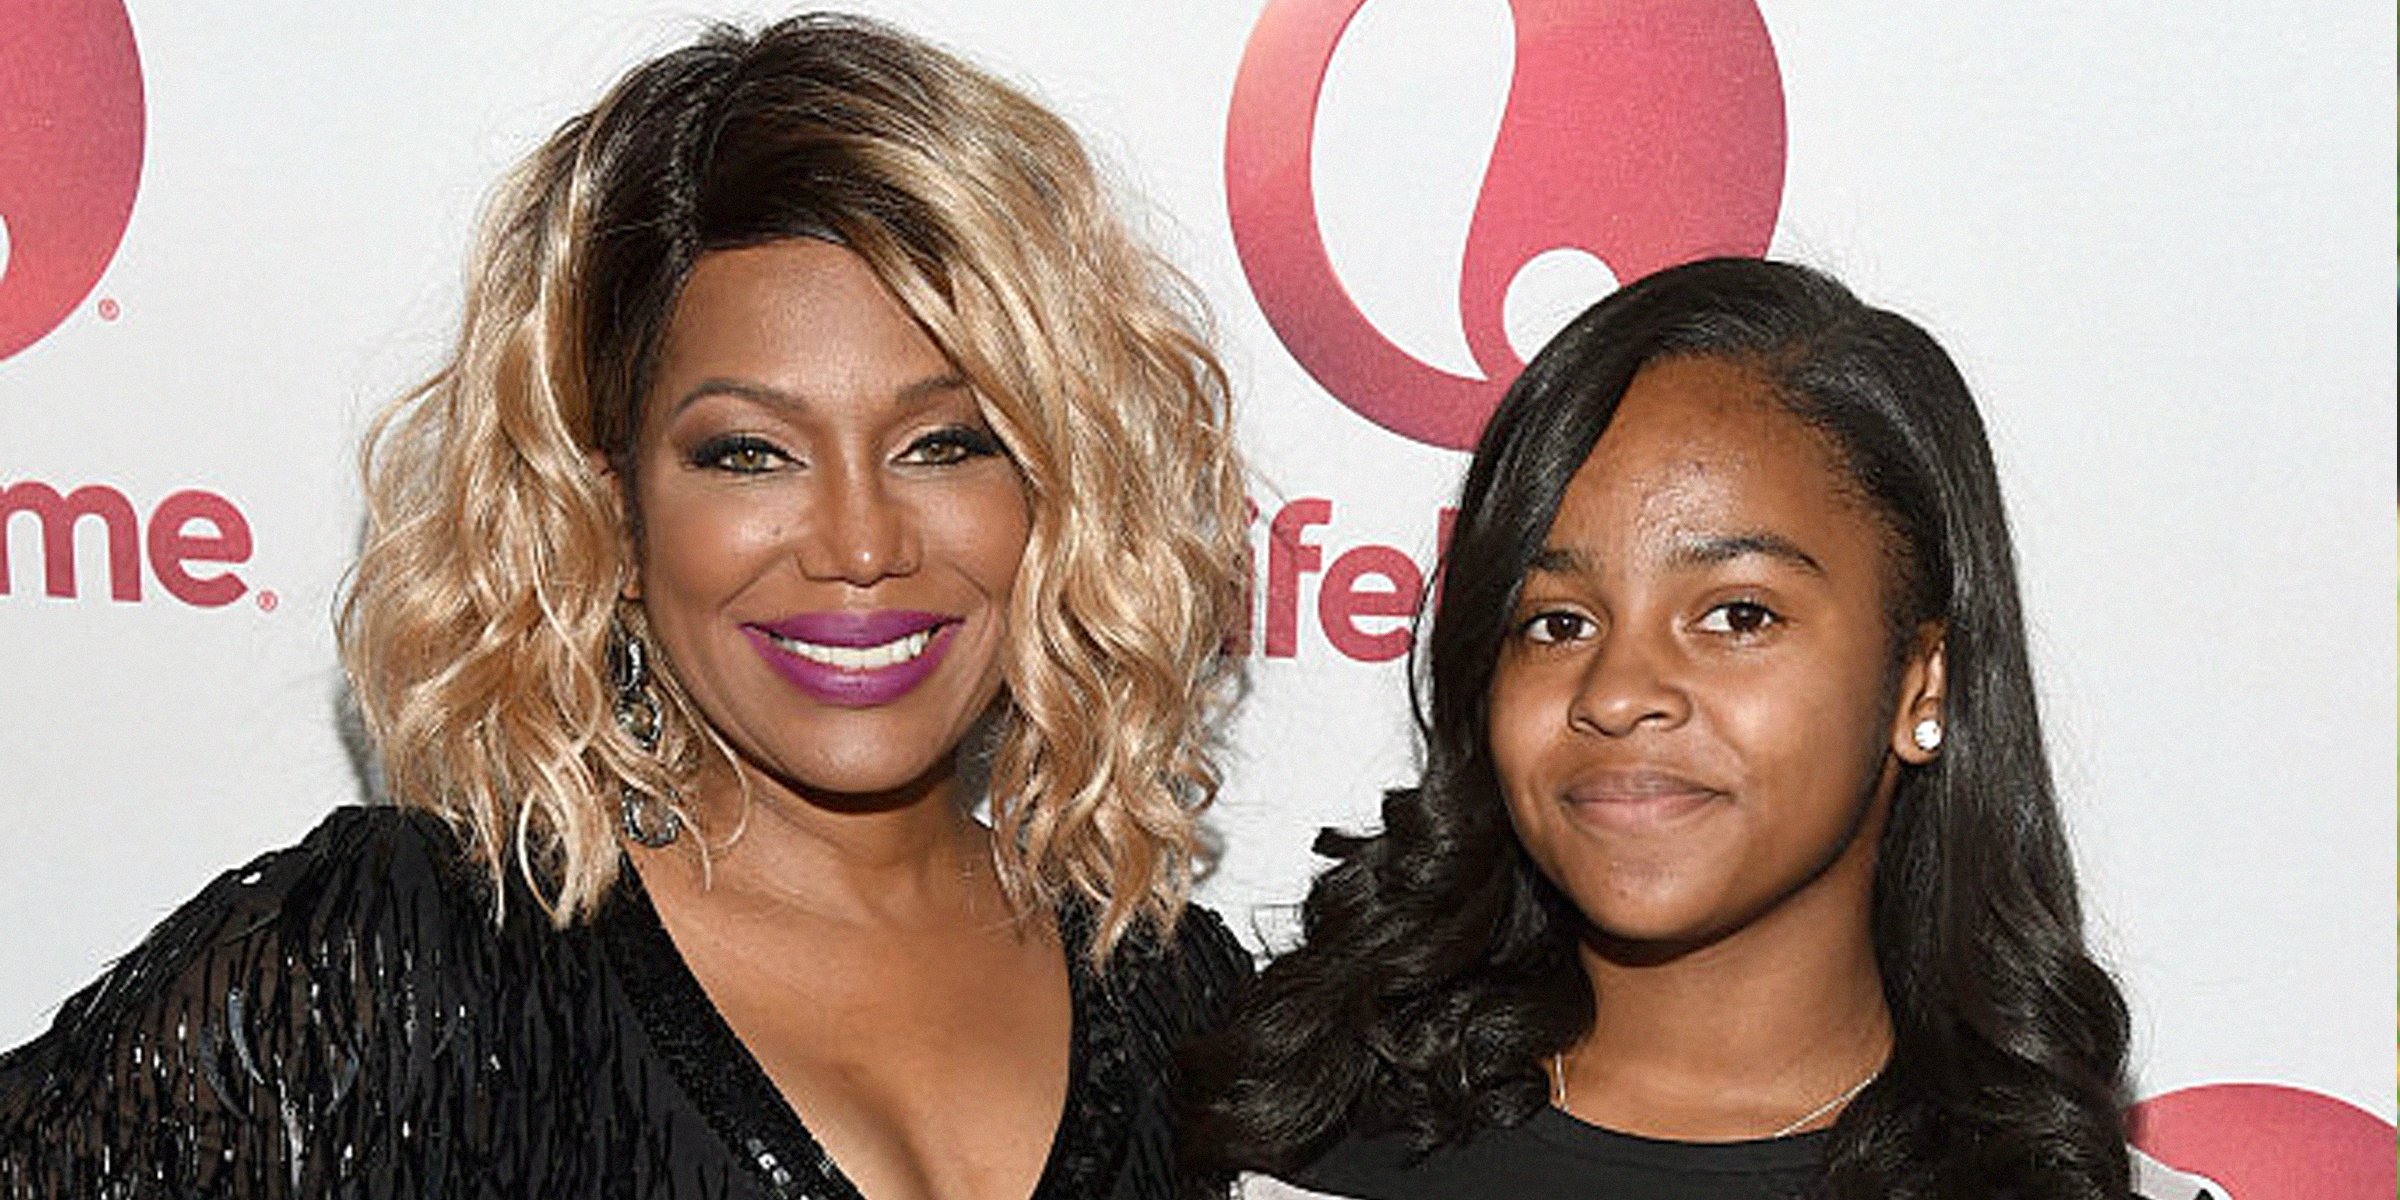 Michel'le Toussant and Bailei Knight | Source: Getty Images